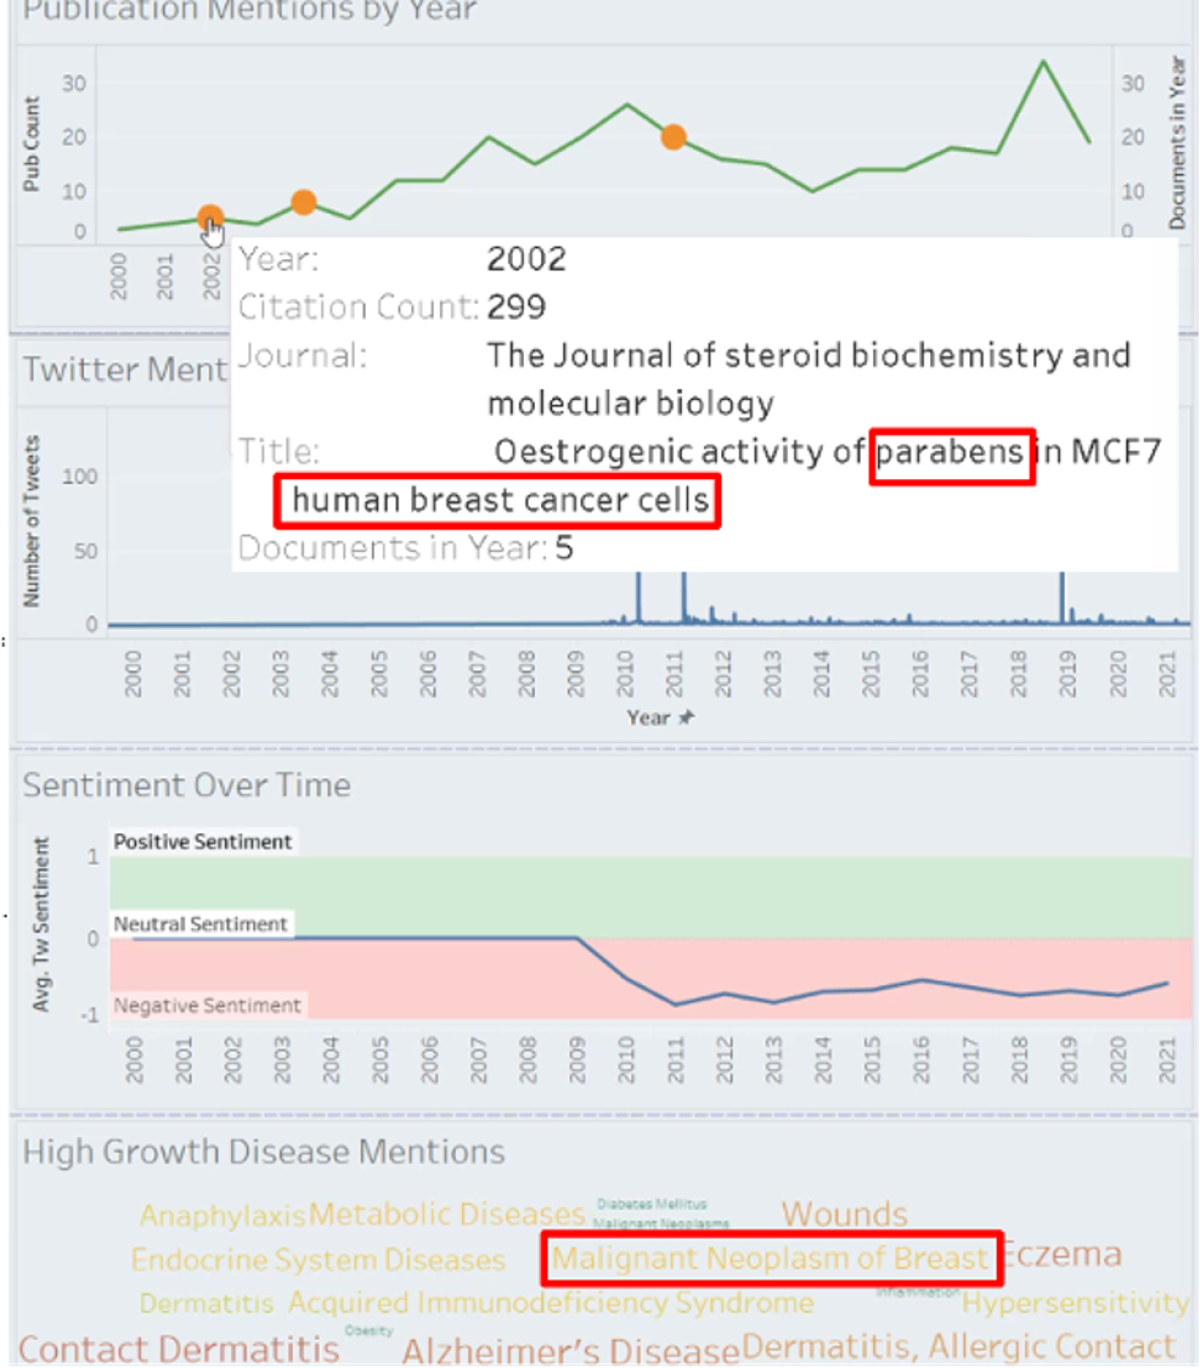 "Flagged" documents in science compared to social spread for Methyl Paraben.